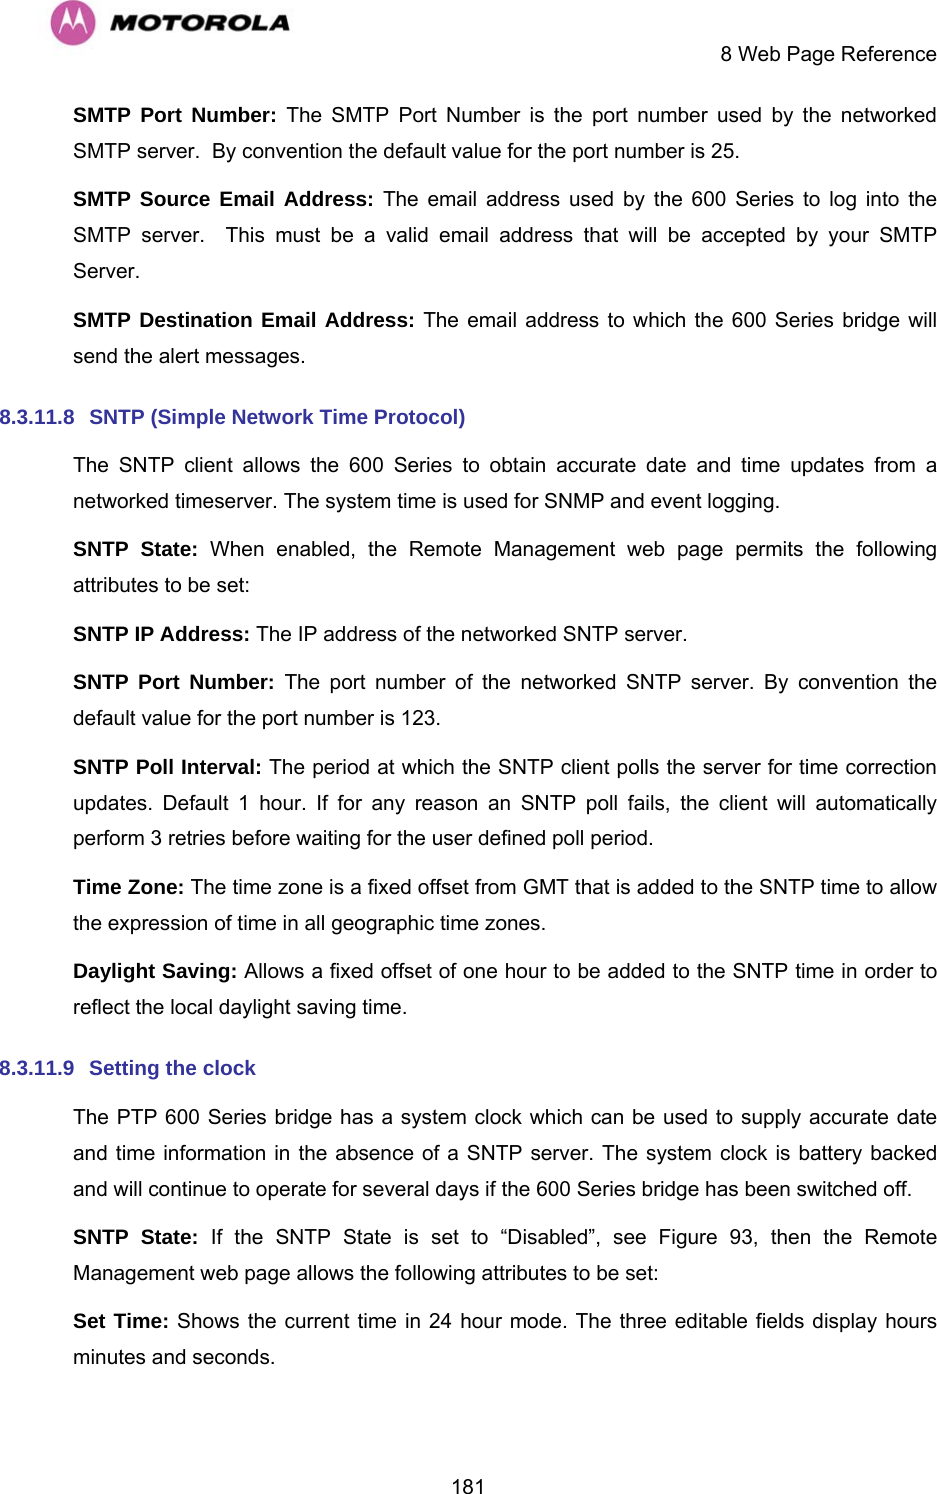     8 Web Page Reference  181SMTP Port Number: The SMTP Port Number is the port number used by the networked SMTP server.  By convention the default value for the port number is 25. SMTP Source Email Address: The email address used by the 600 Series to log into the SMTP server.  This must be a valid email address that will be accepted by your SMTP Server. SMTP Destination Email Address: The email address to which the 600 Series bridge will send the alert messages. 8.3.11.8  SNTP (Simple Network Time Protocol) The SNTP client allows the 600 Series to obtain accurate date and time updates from a networked timeserver. The system time is used for SNMP and event logging. SNTP State: When enabled, the Remote Management web page permits the following attributes to be set: SNTP IP Address: The IP address of the networked SNTP server. SNTP Port Number: The port number of the networked SNTP server. By convention the default value for the port number is 123. SNTP Poll Interval: The period at which the SNTP client polls the server for time correction updates. Default 1 hour. If for any reason an SNTP poll fails, the client will automatically perform 3 retries before waiting for the user defined poll period. Time Zone: The time zone is a fixed offset from GMT that is added to the SNTP time to allow the expression of time in all geographic time zones. Daylight Saving: Allows a fixed offset of one hour to be added to the SNTP time in order to reflect the local daylight saving time. 8.3.11.9  Setting the clock  The PTP 600 Series bridge has a system clock which can be used to supply accurate date and time information in the absence of a SNTP server. The system clock is battery backed and will continue to operate for several days if the 600 Series bridge has been switched off. SNTP State: If the SNTP State is set to “Disabled”, see Figure 93, then the Remote Management web page allows the following attributes to be set: Set Time: Shows the current time in 24 hour mode. The three editable fields display hours minutes and seconds. 